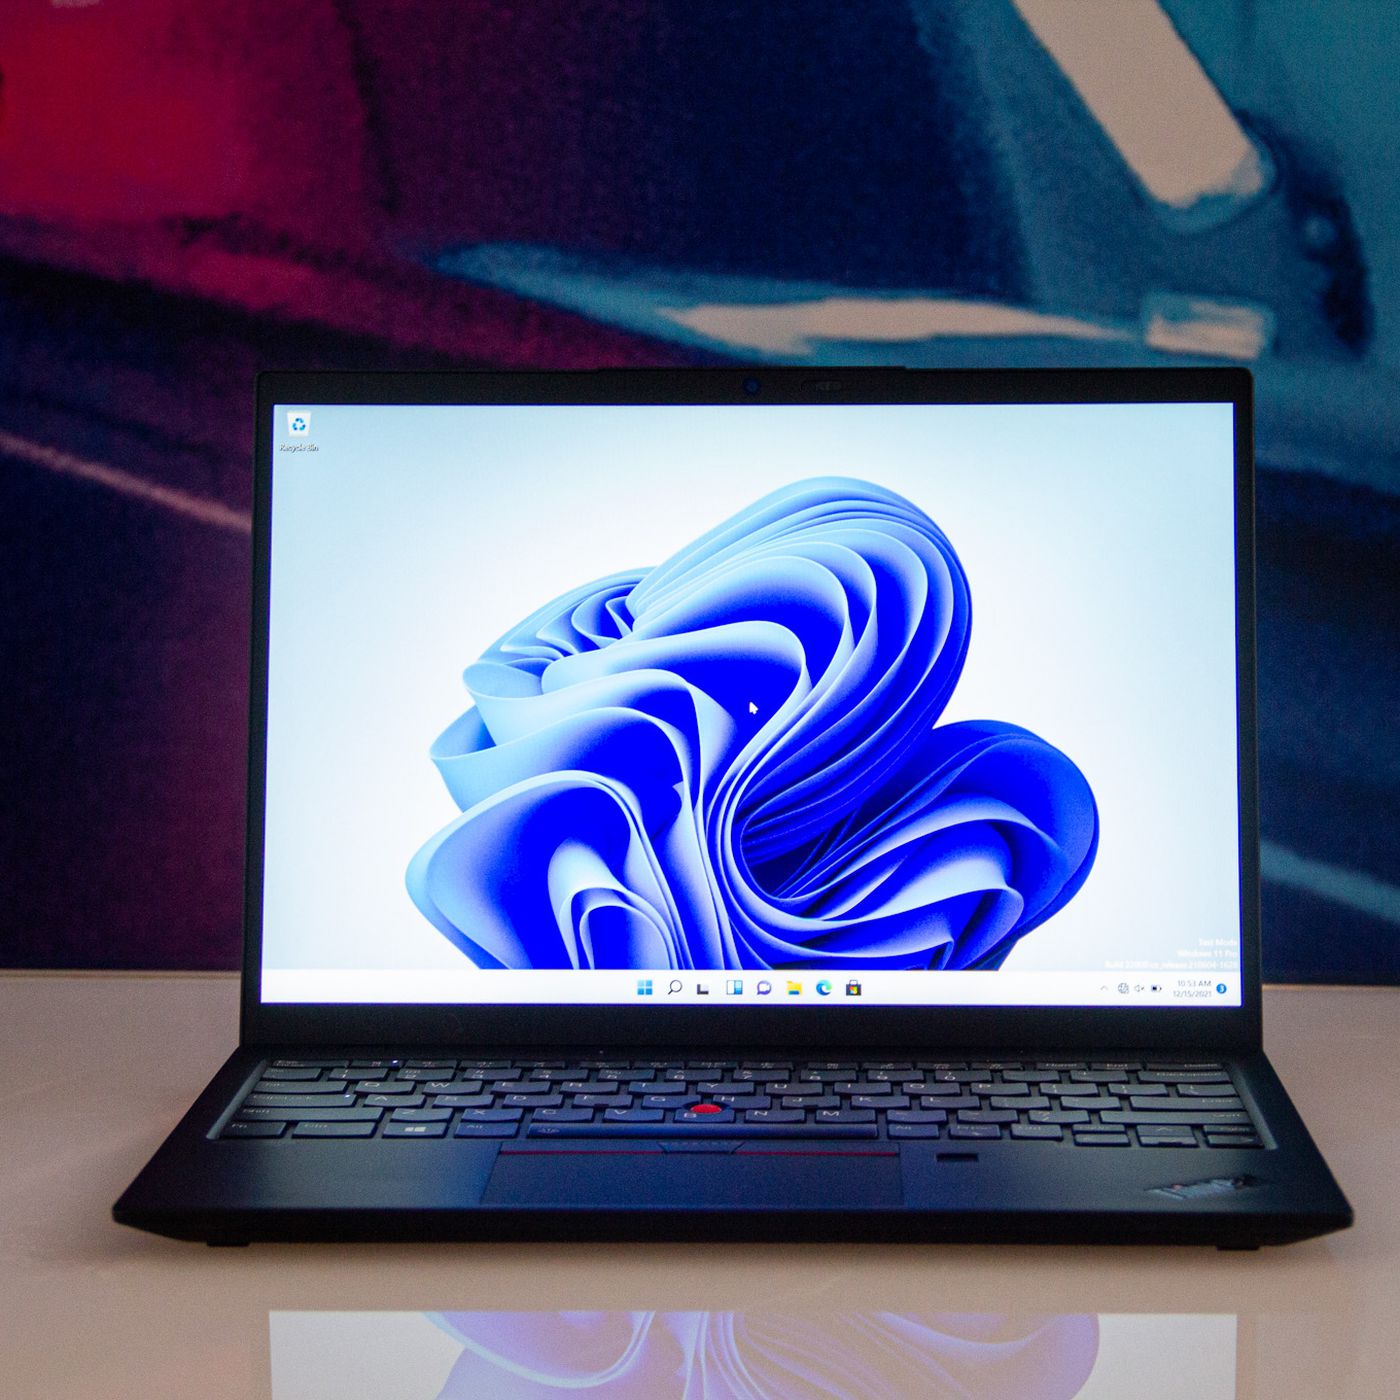 Lenovo ThinkPad X1 Carbon 10th-Gen hands-on - The Verge